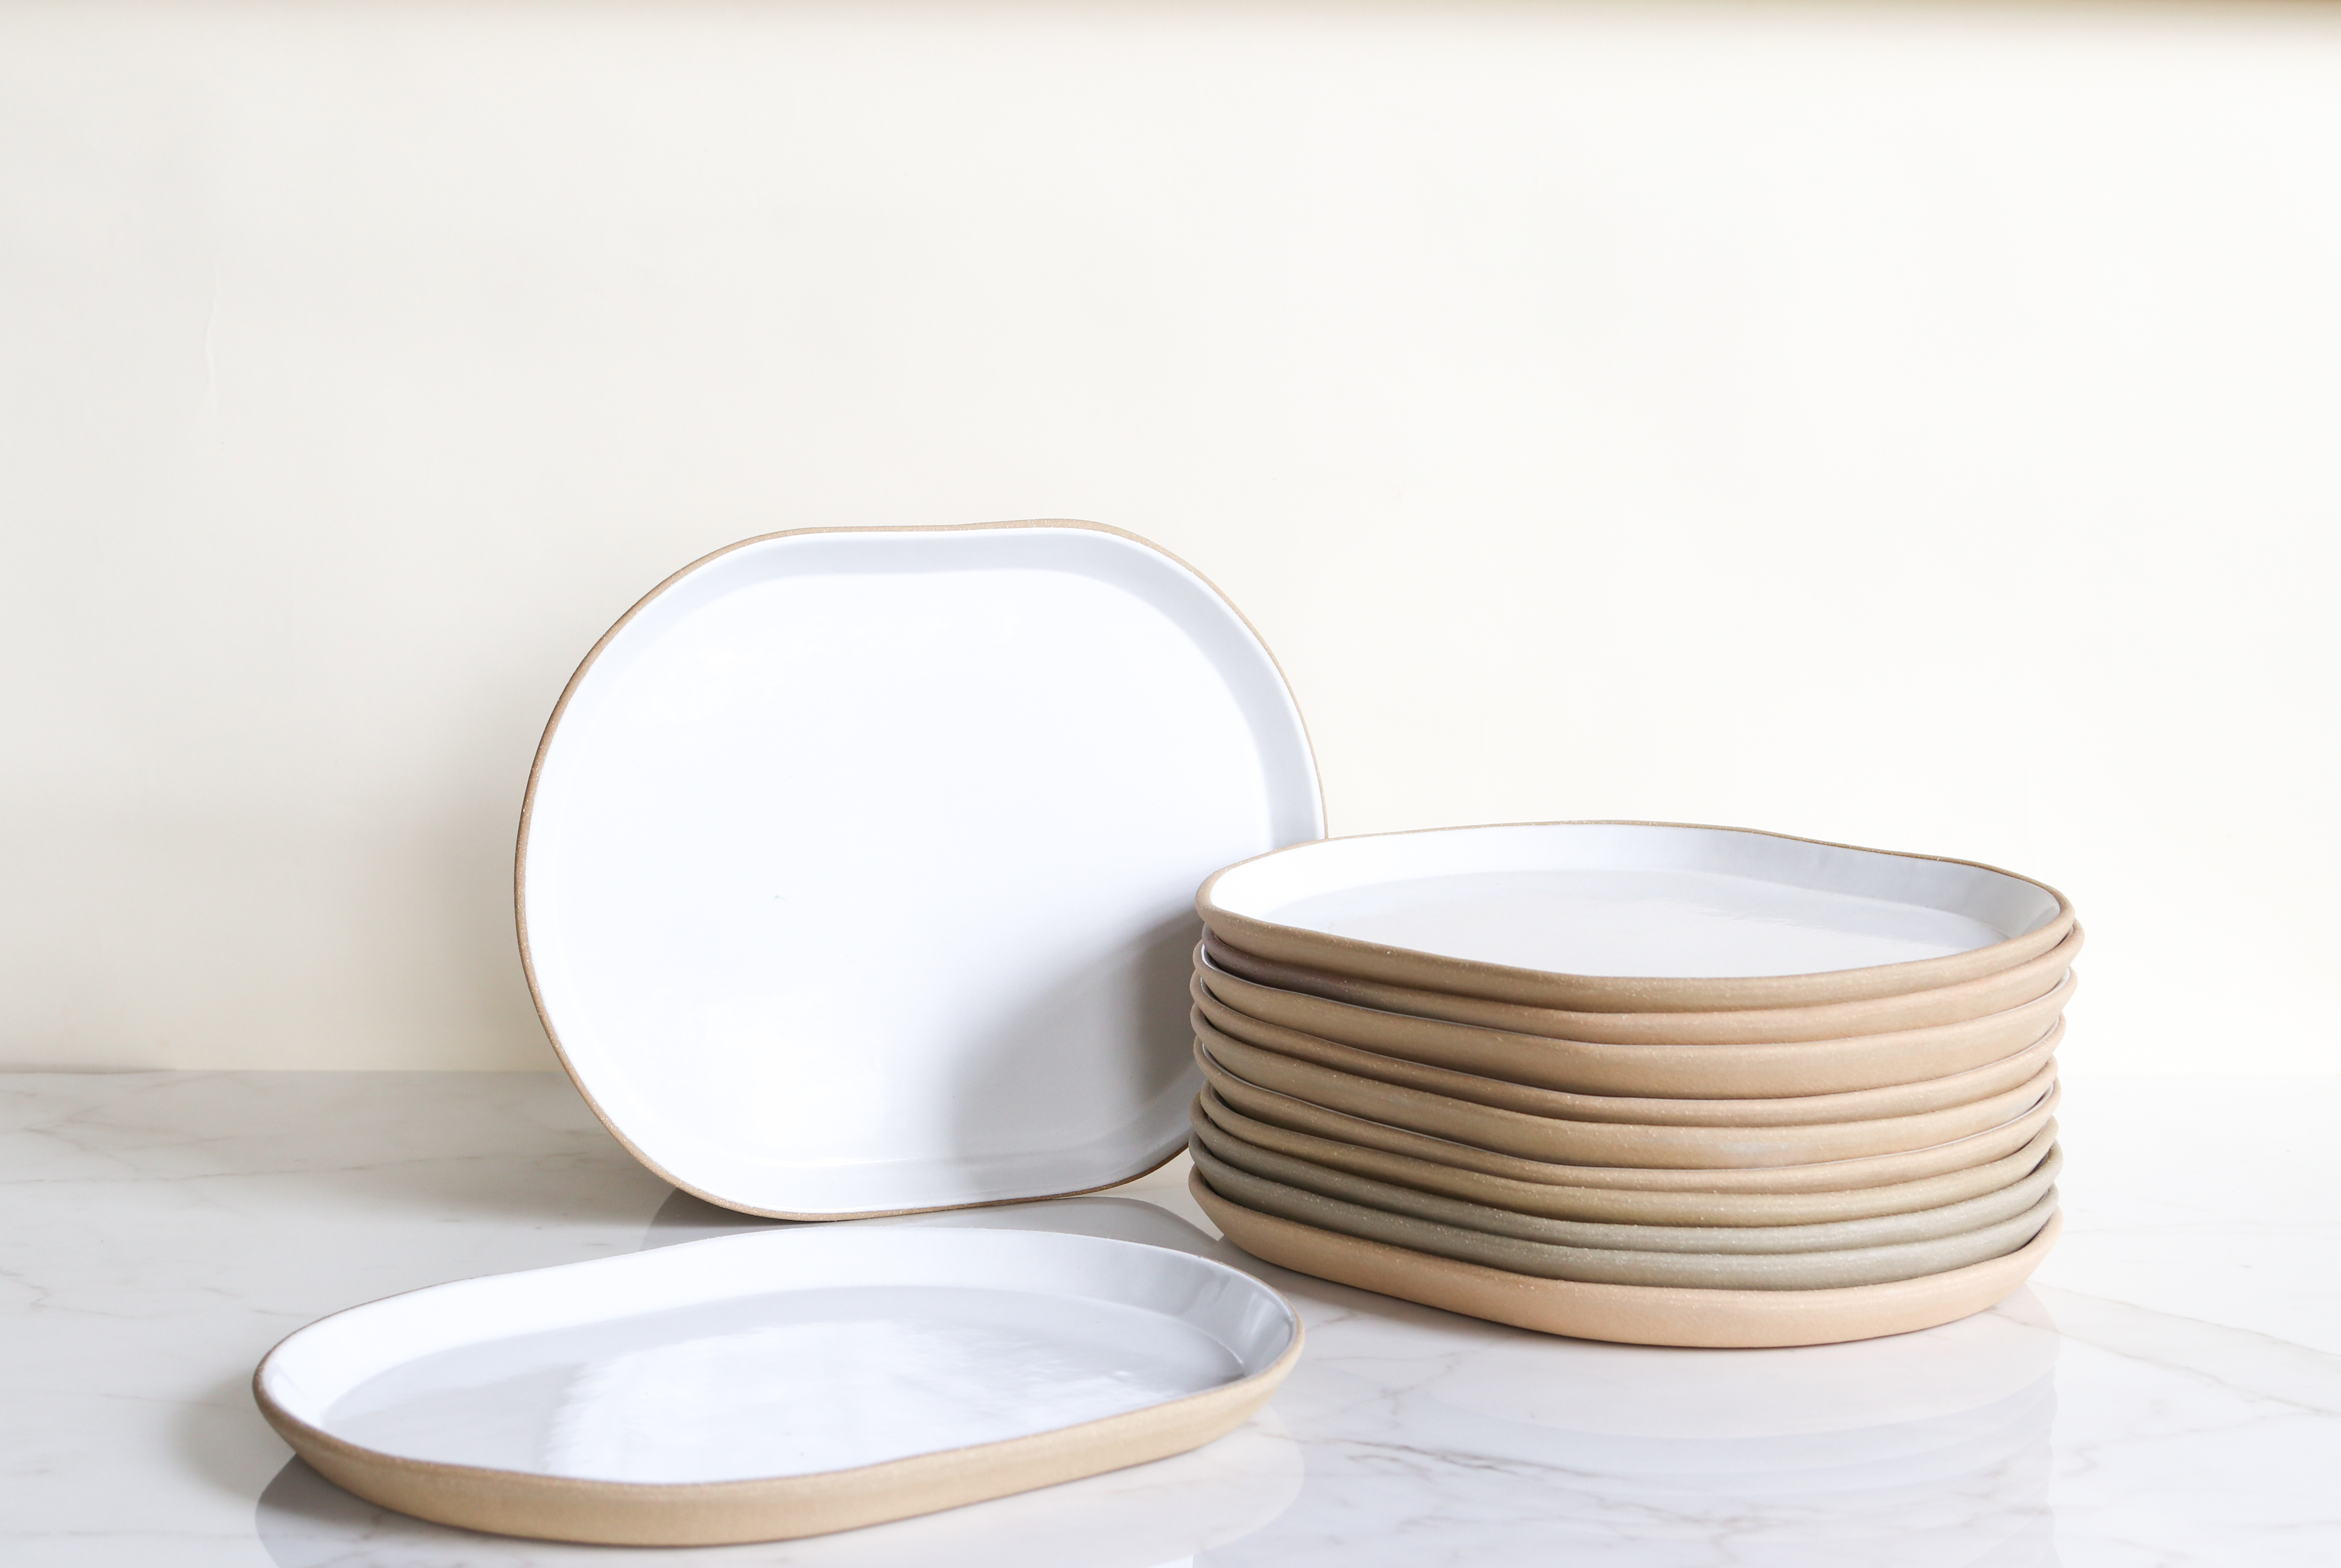 lot-of-24-large-oval-platters